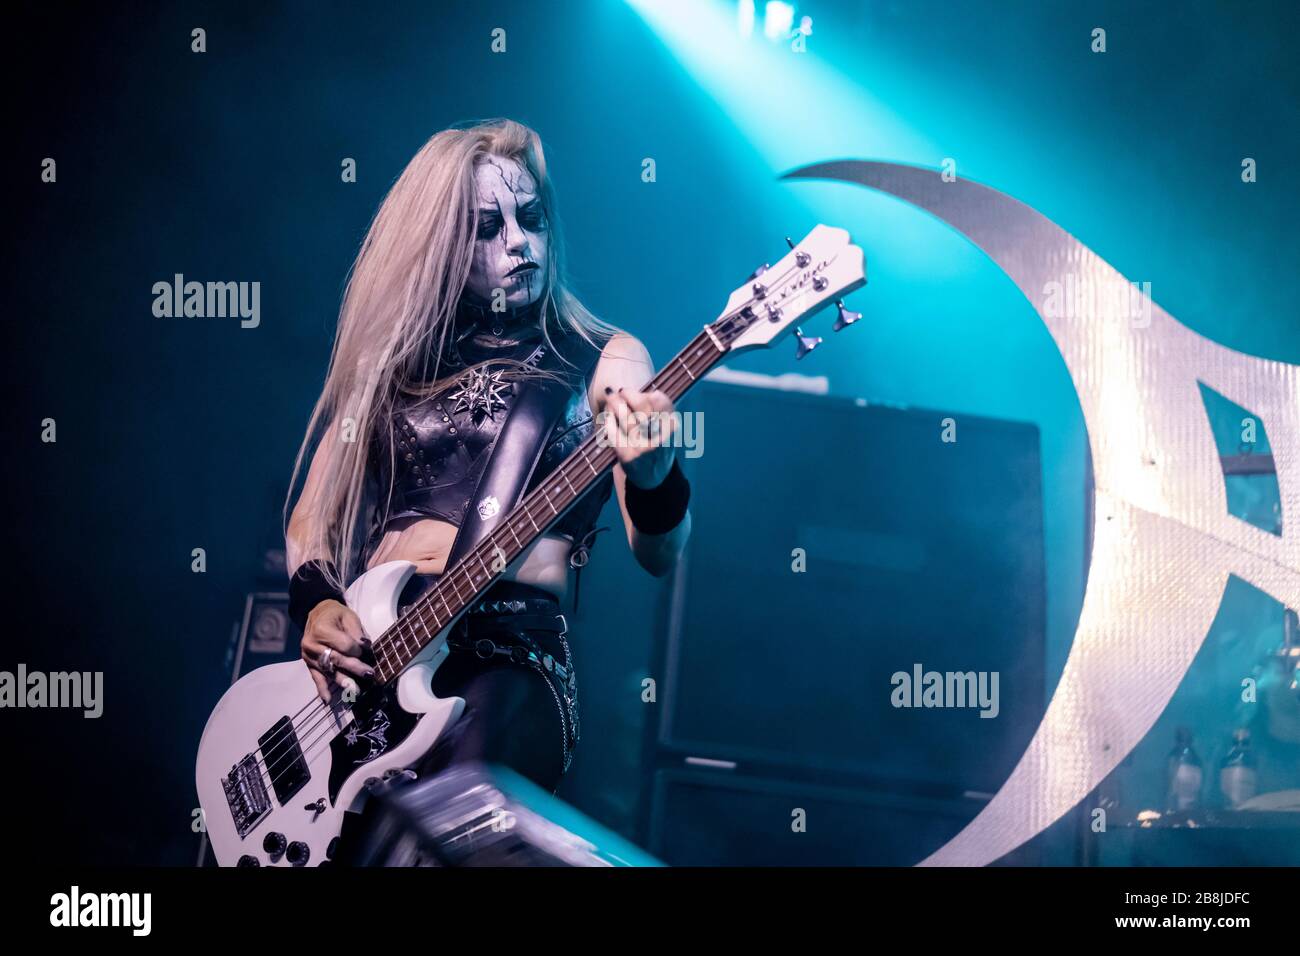 Bergen, Norway. 25th, August 2019. The Norwegian black metal band Abbath  performs a live concert at the Norwegian heavy metal festival Beyond the  Gates 2019 in Bergen. Here bass player Mia Wallace